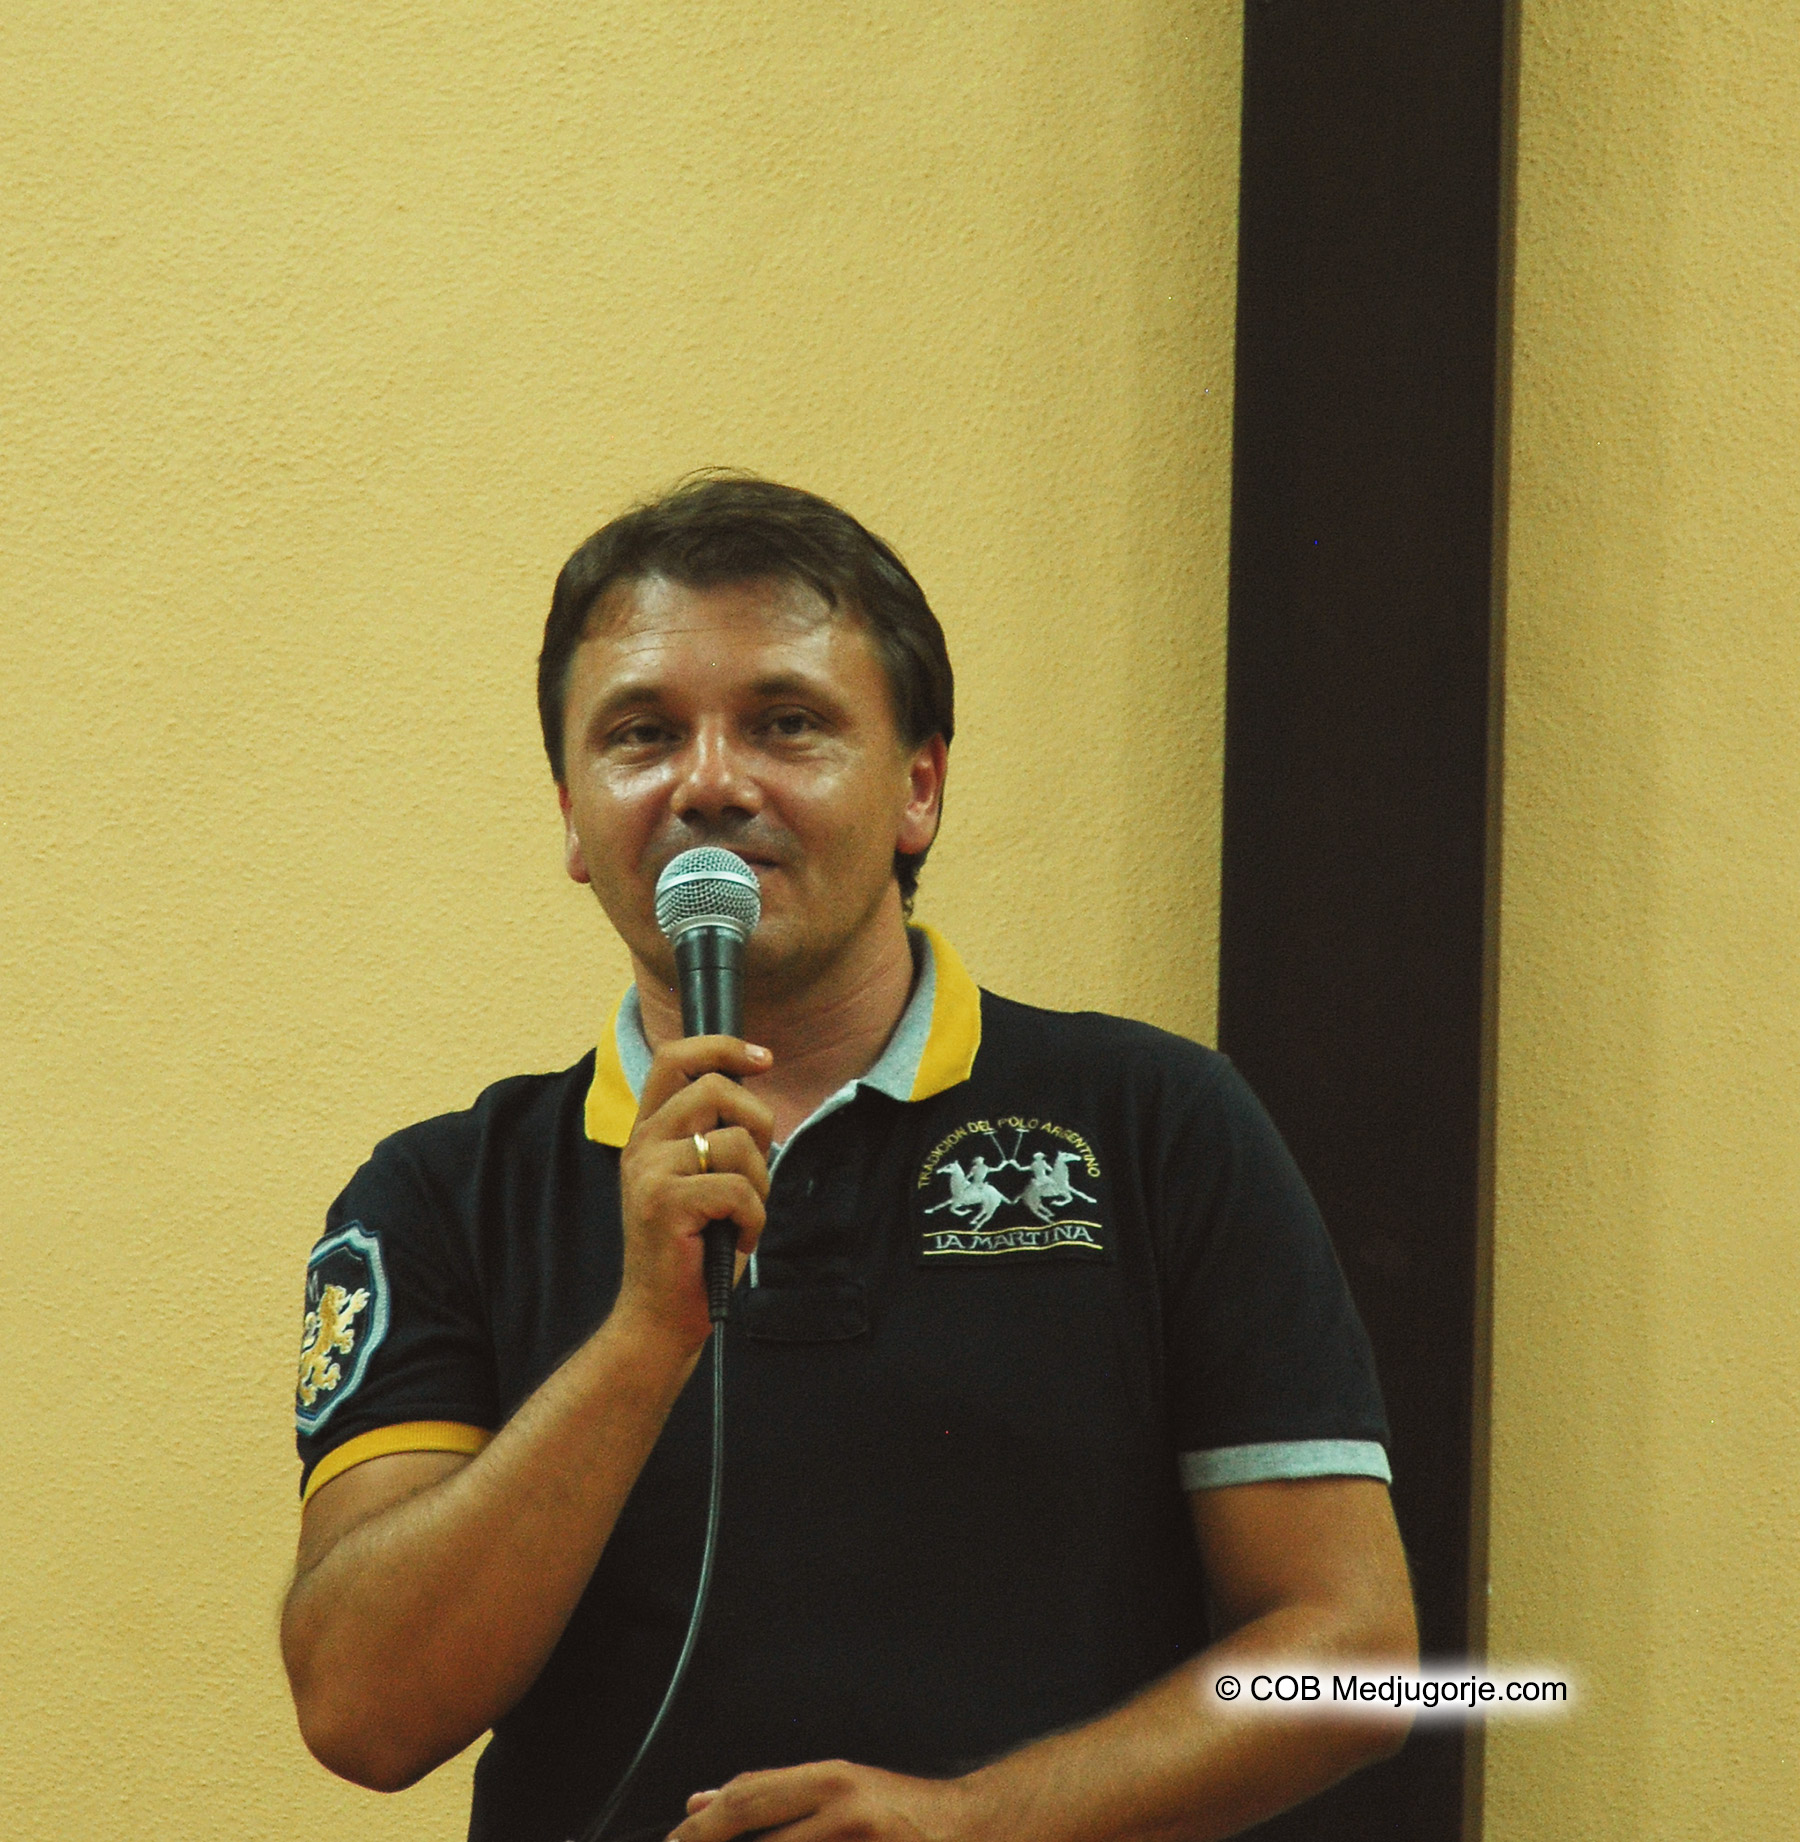 Visionary Jakov Colo speaking to Pilgrims August 20, 2009